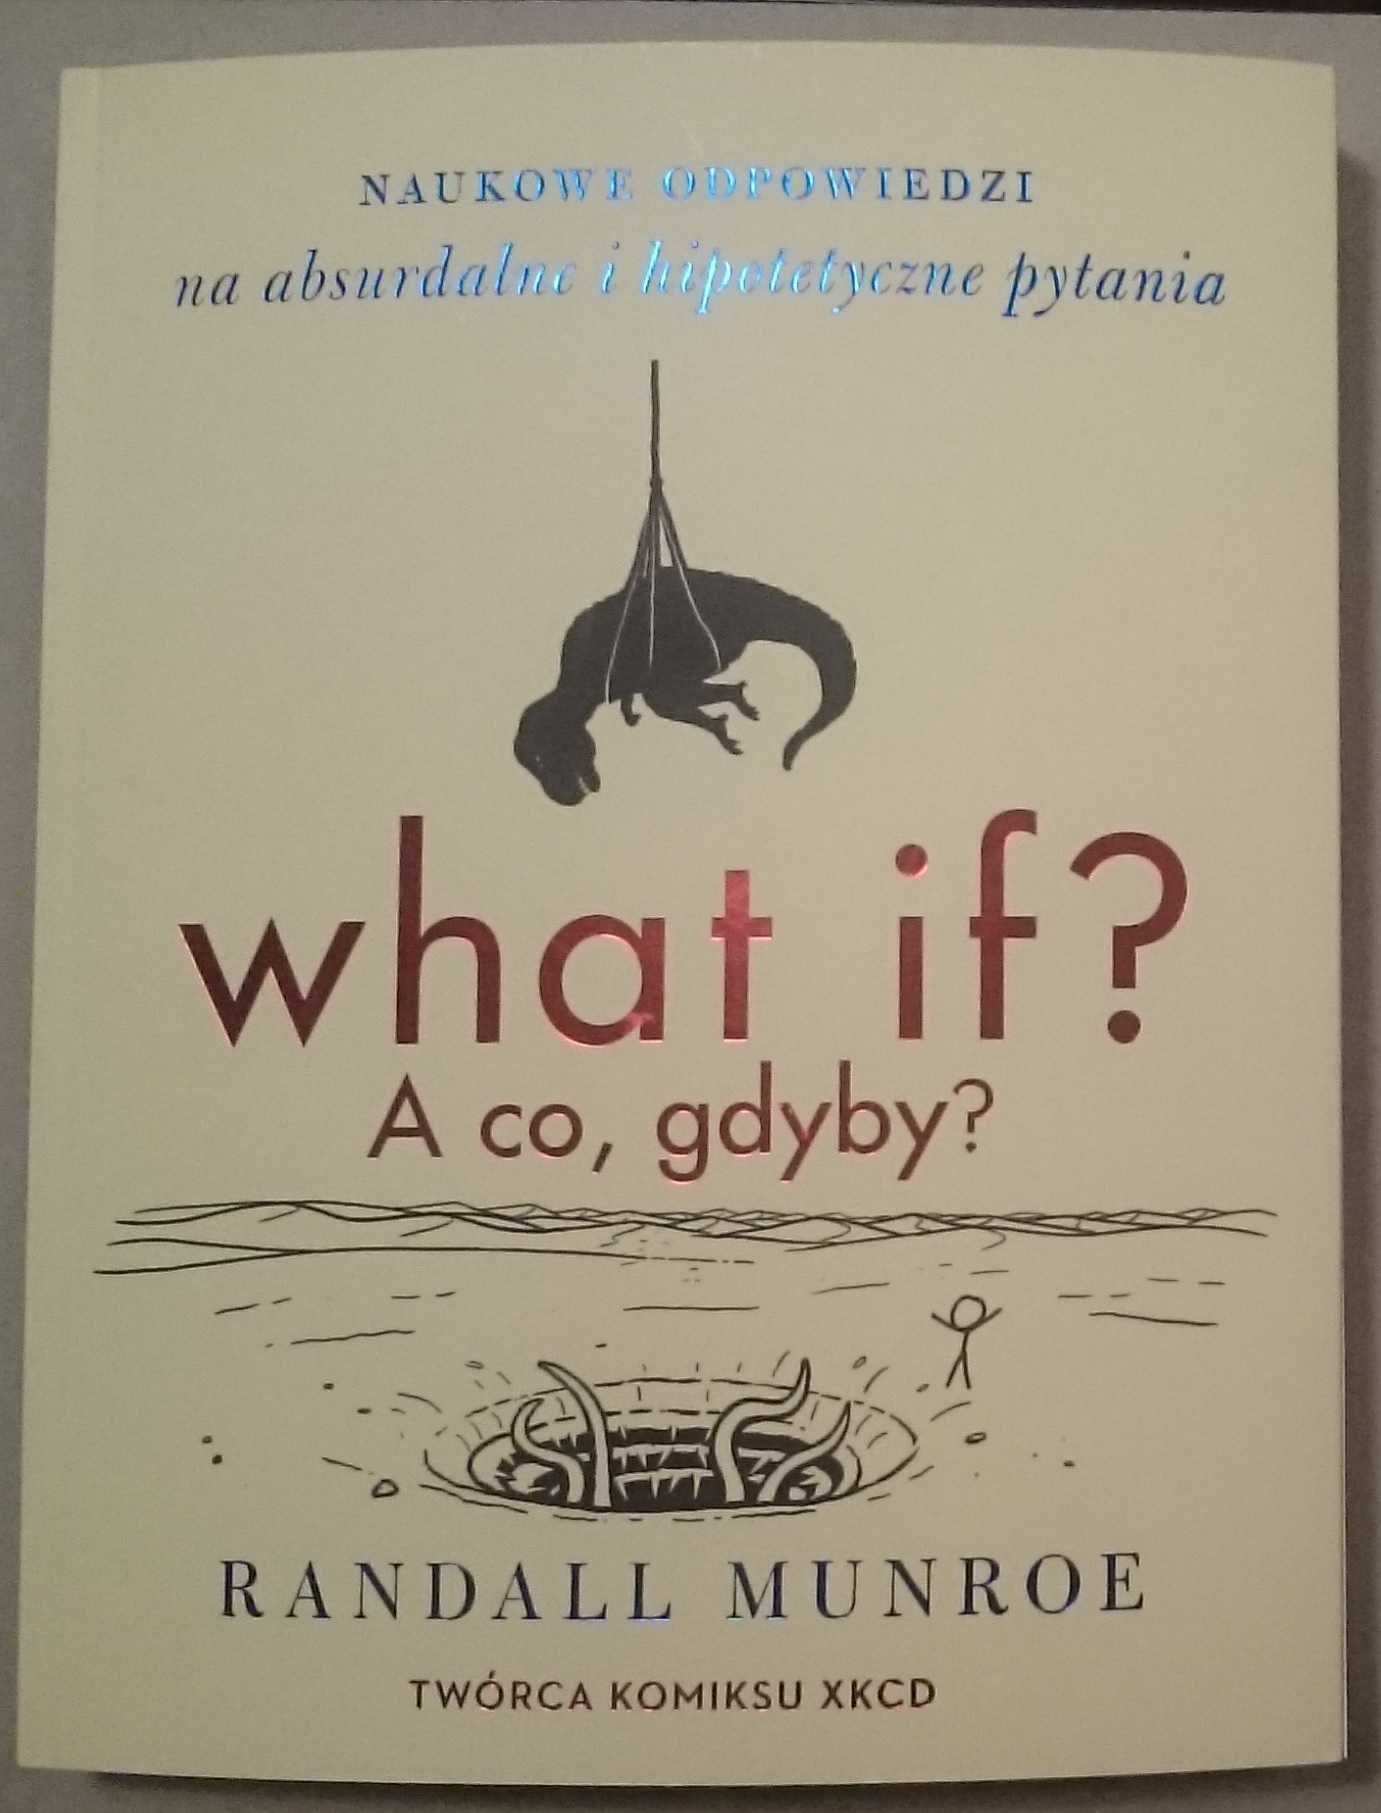 R. Munroe - What if? A co, gdyby?